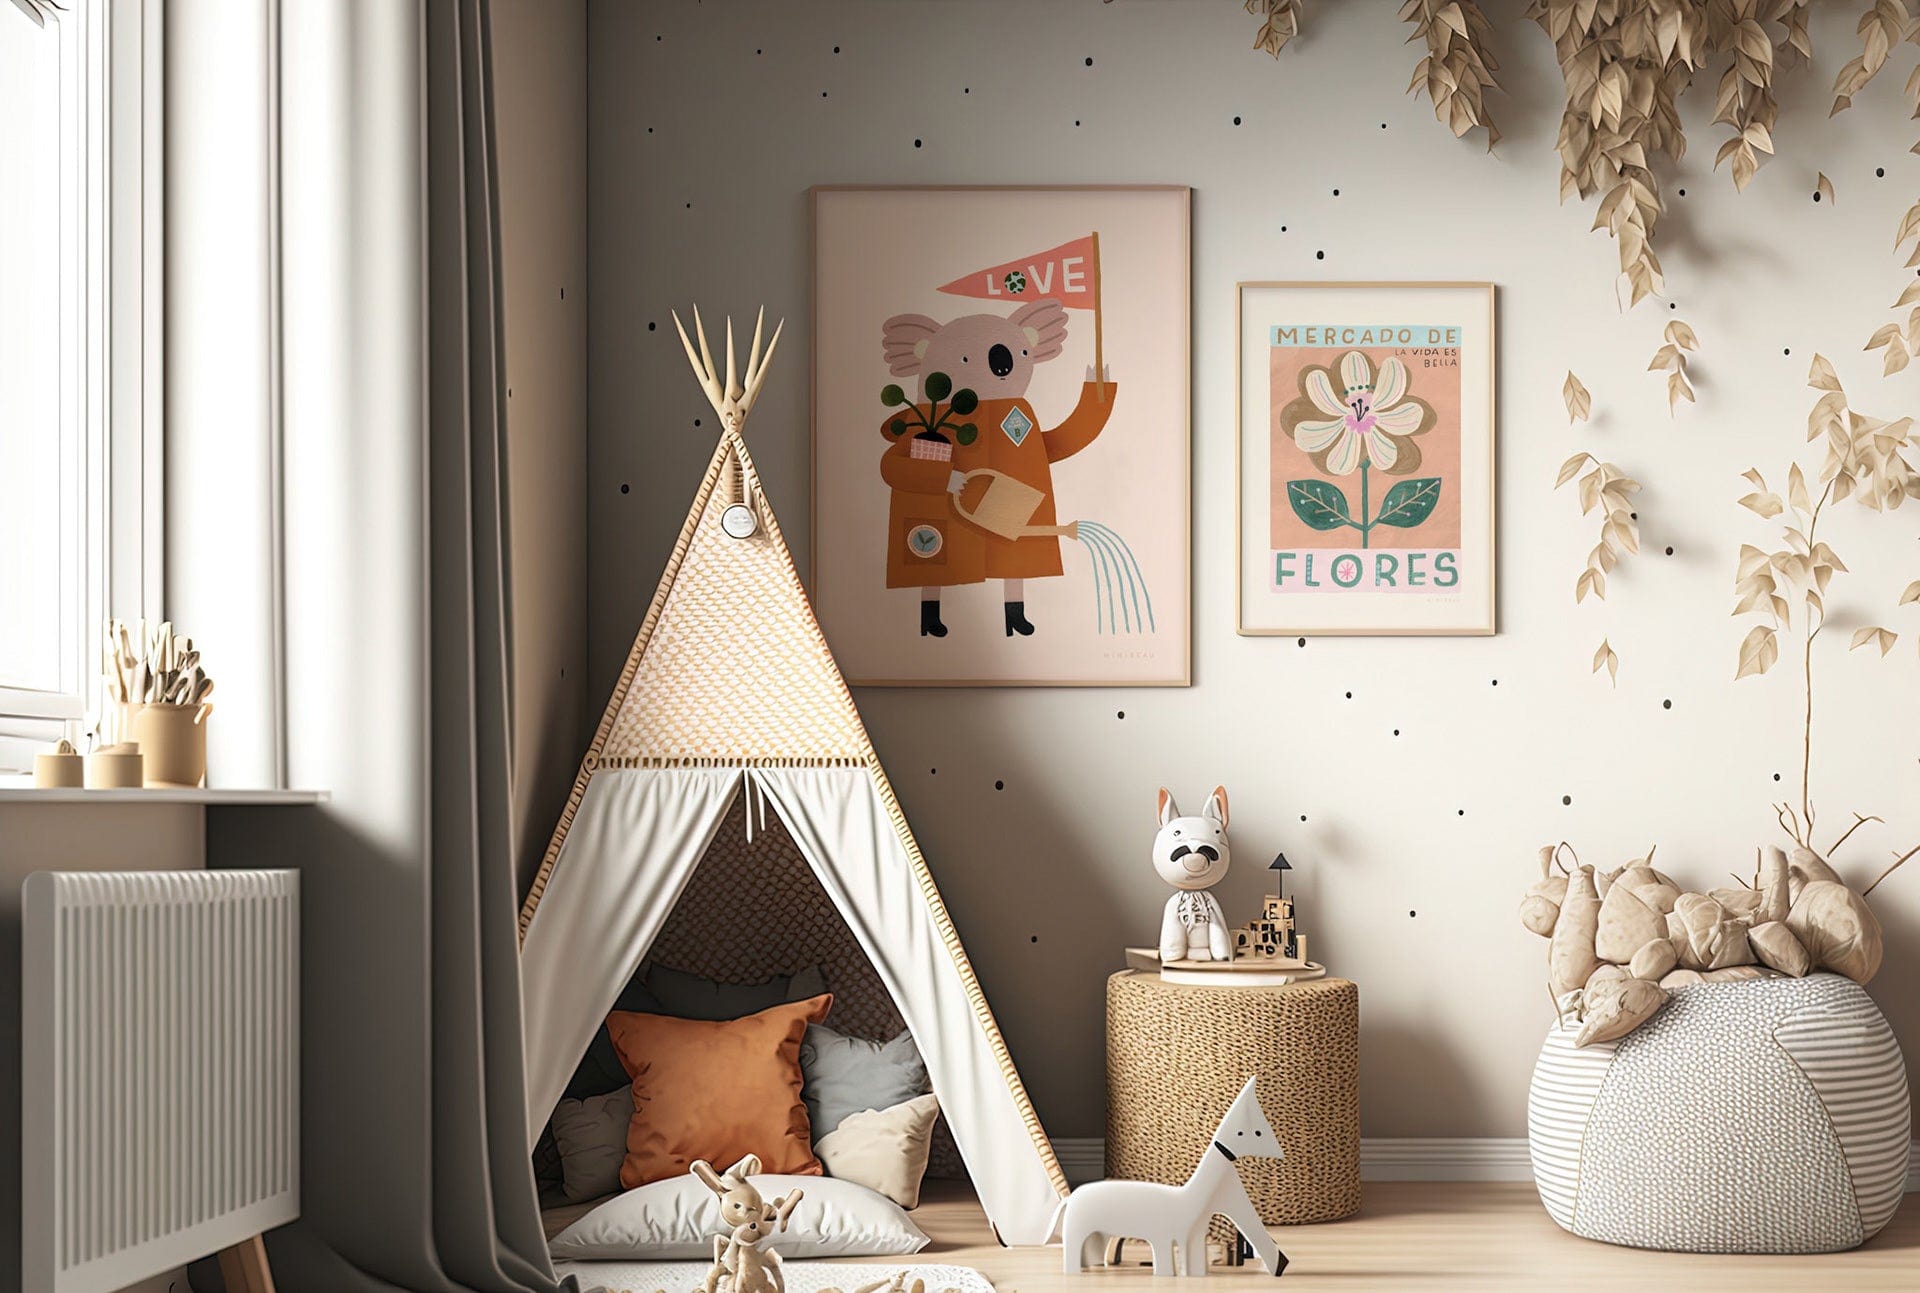 The corner of a childs playroom with a neutral teepee, leopard print side table, and grey dotted and striped pouffe, the wall wallpapered in a neutral colour with black dots spaced out across the wall irregularly. Toys are in the foreground. On the wall art 2 art prints in light wood frames. The larger being our love our planet koala art print and the smaller being our mercado de flores art print. 